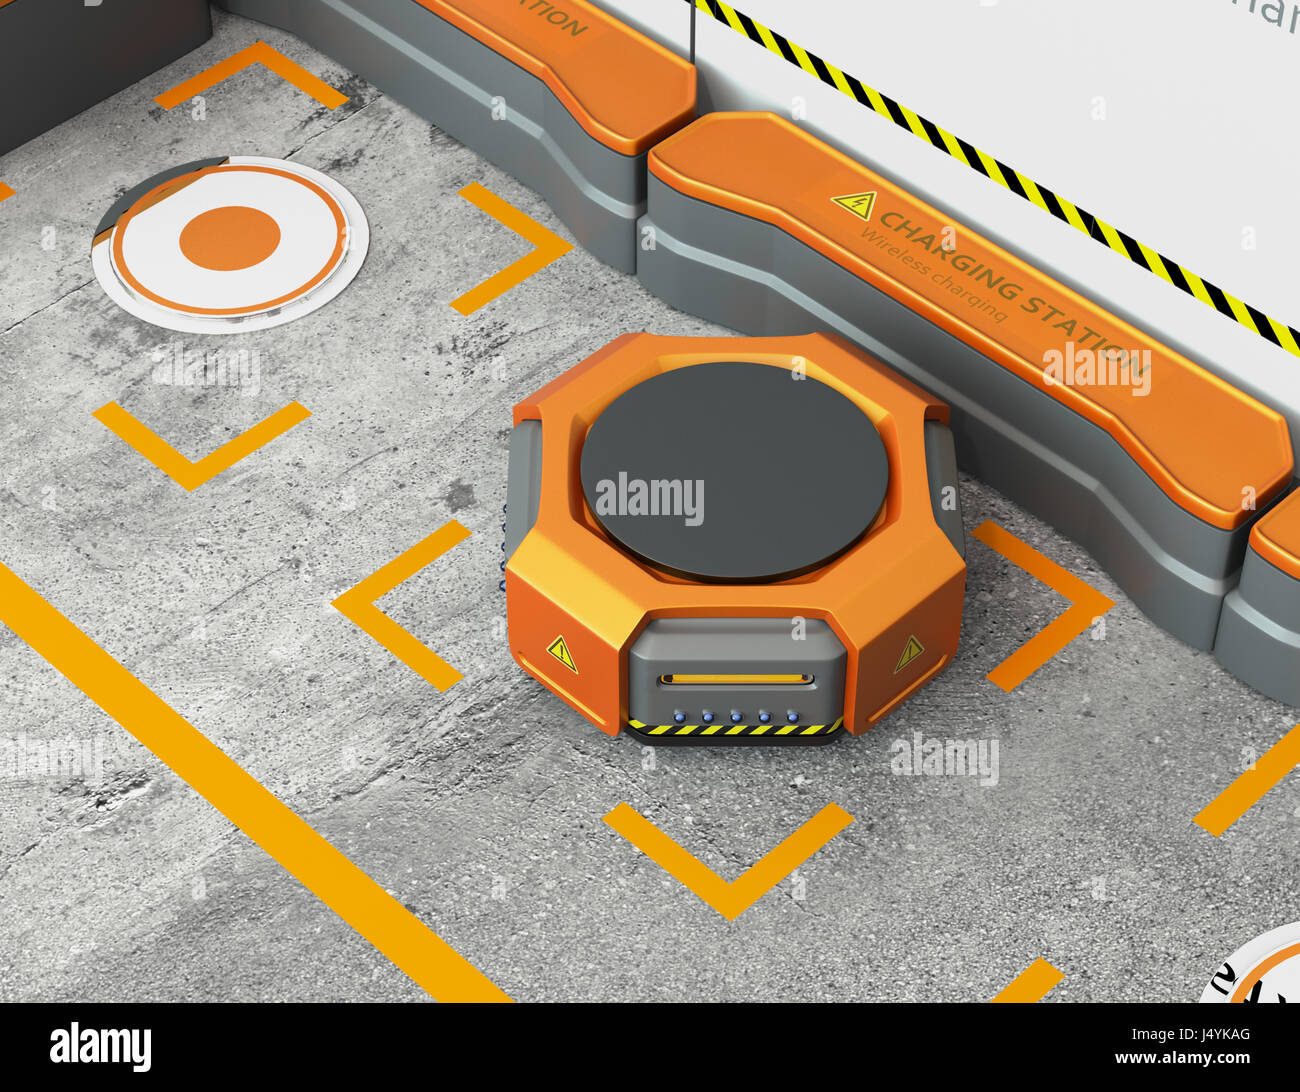 Warehouse robot charging at charging station. Advanced warehouse robotics technology concept. 3D rendering image. Stock Photo